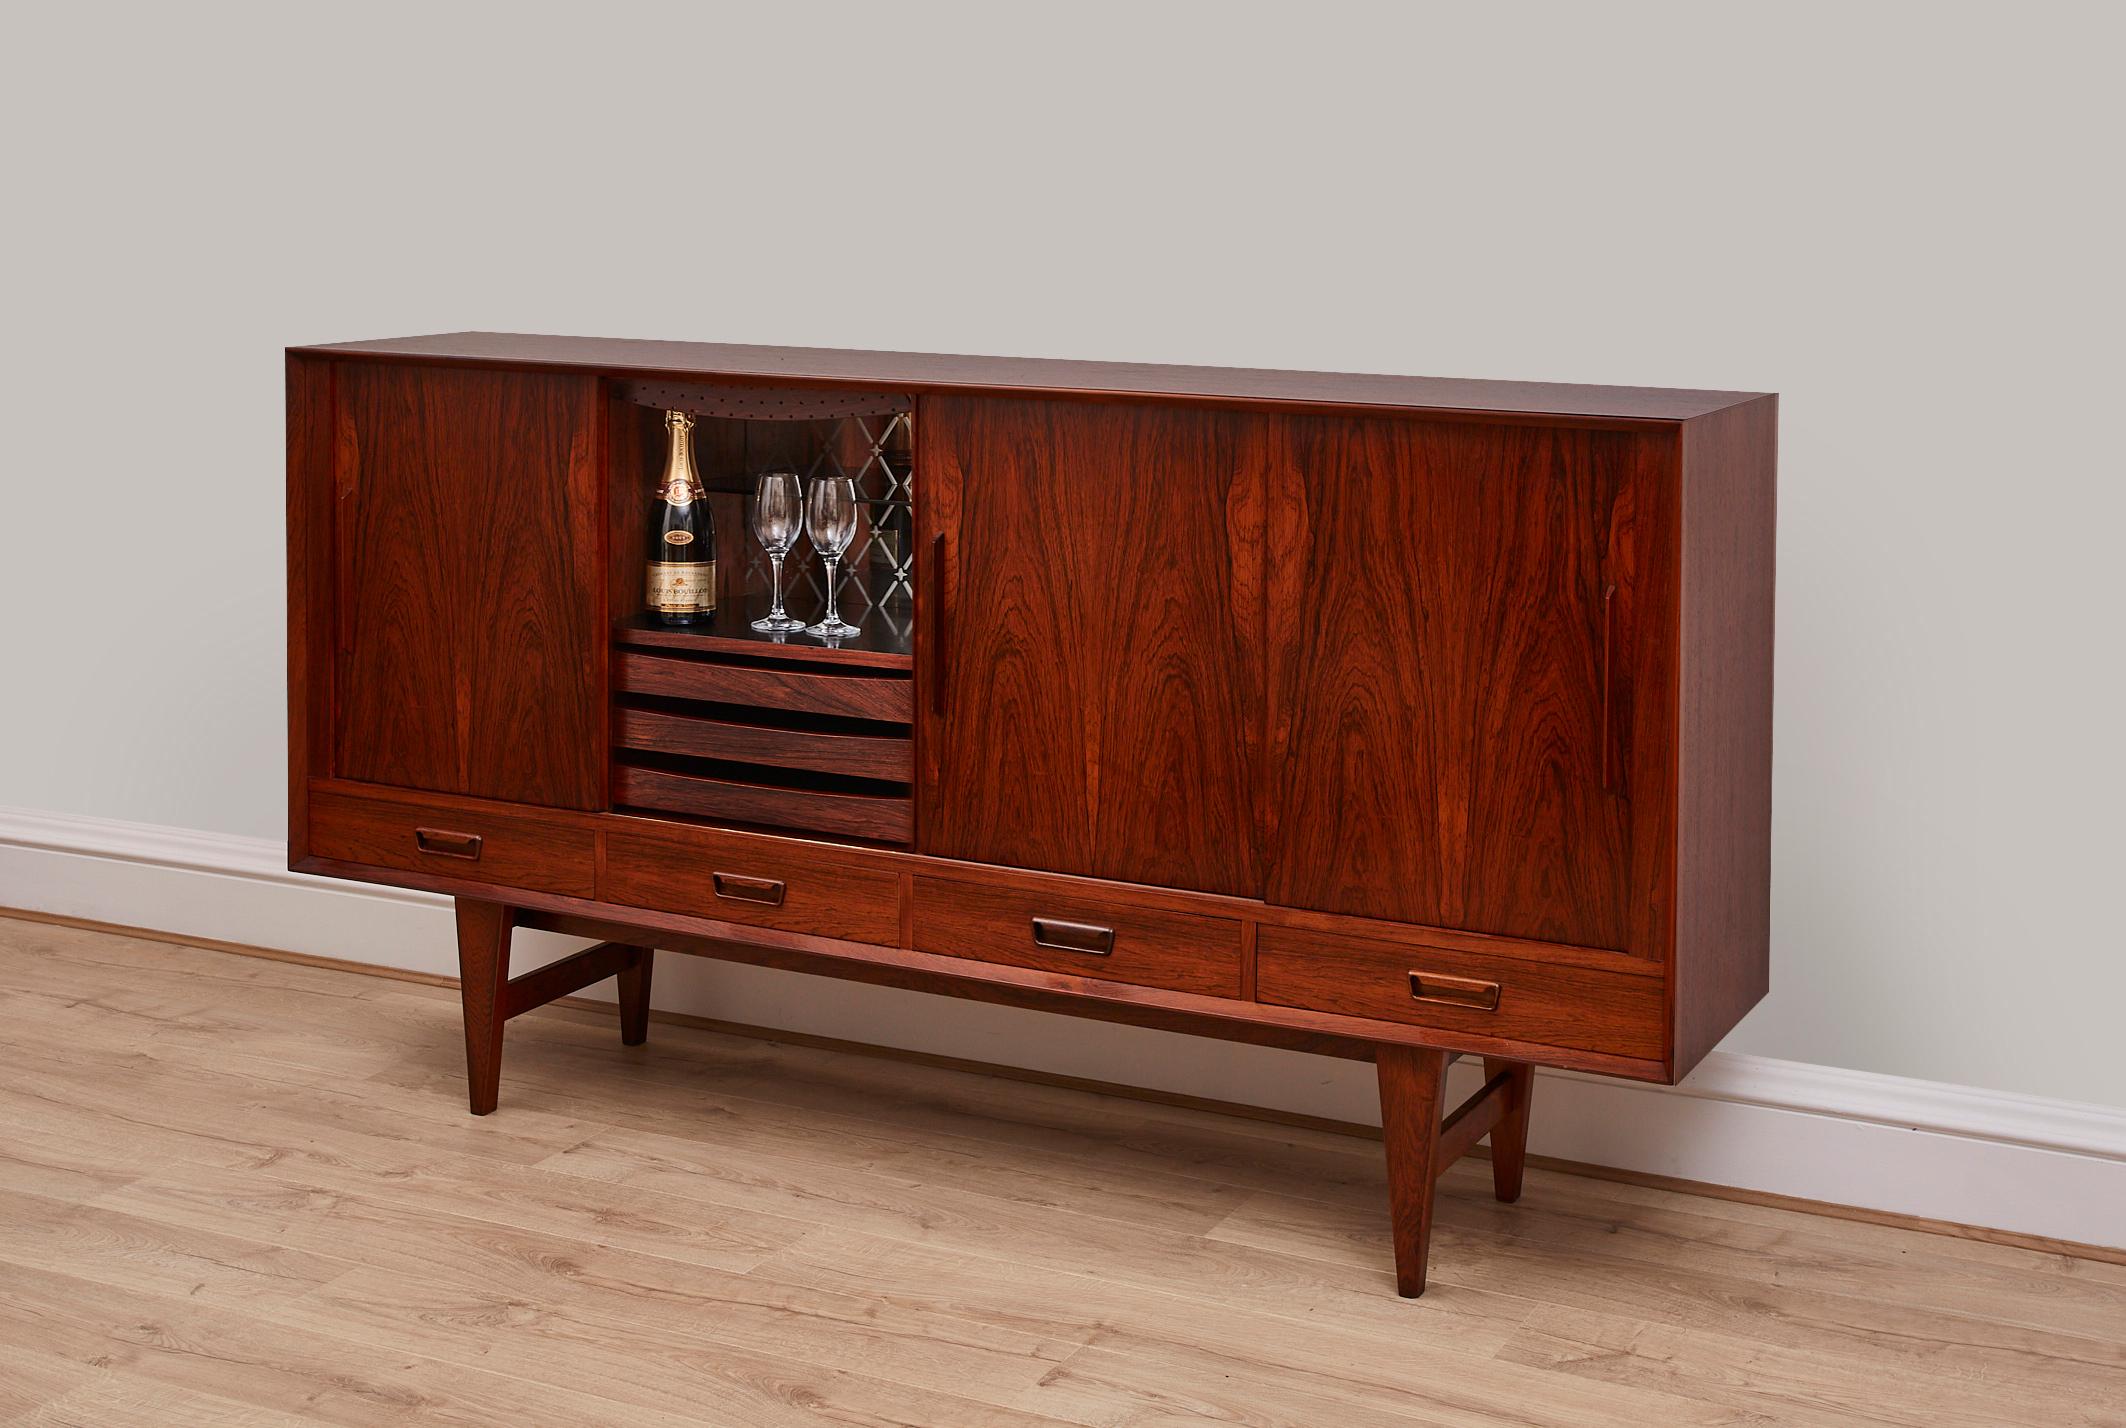 Danish 1960's Rosewood Sideboard With Inside Mirrored Bar 1